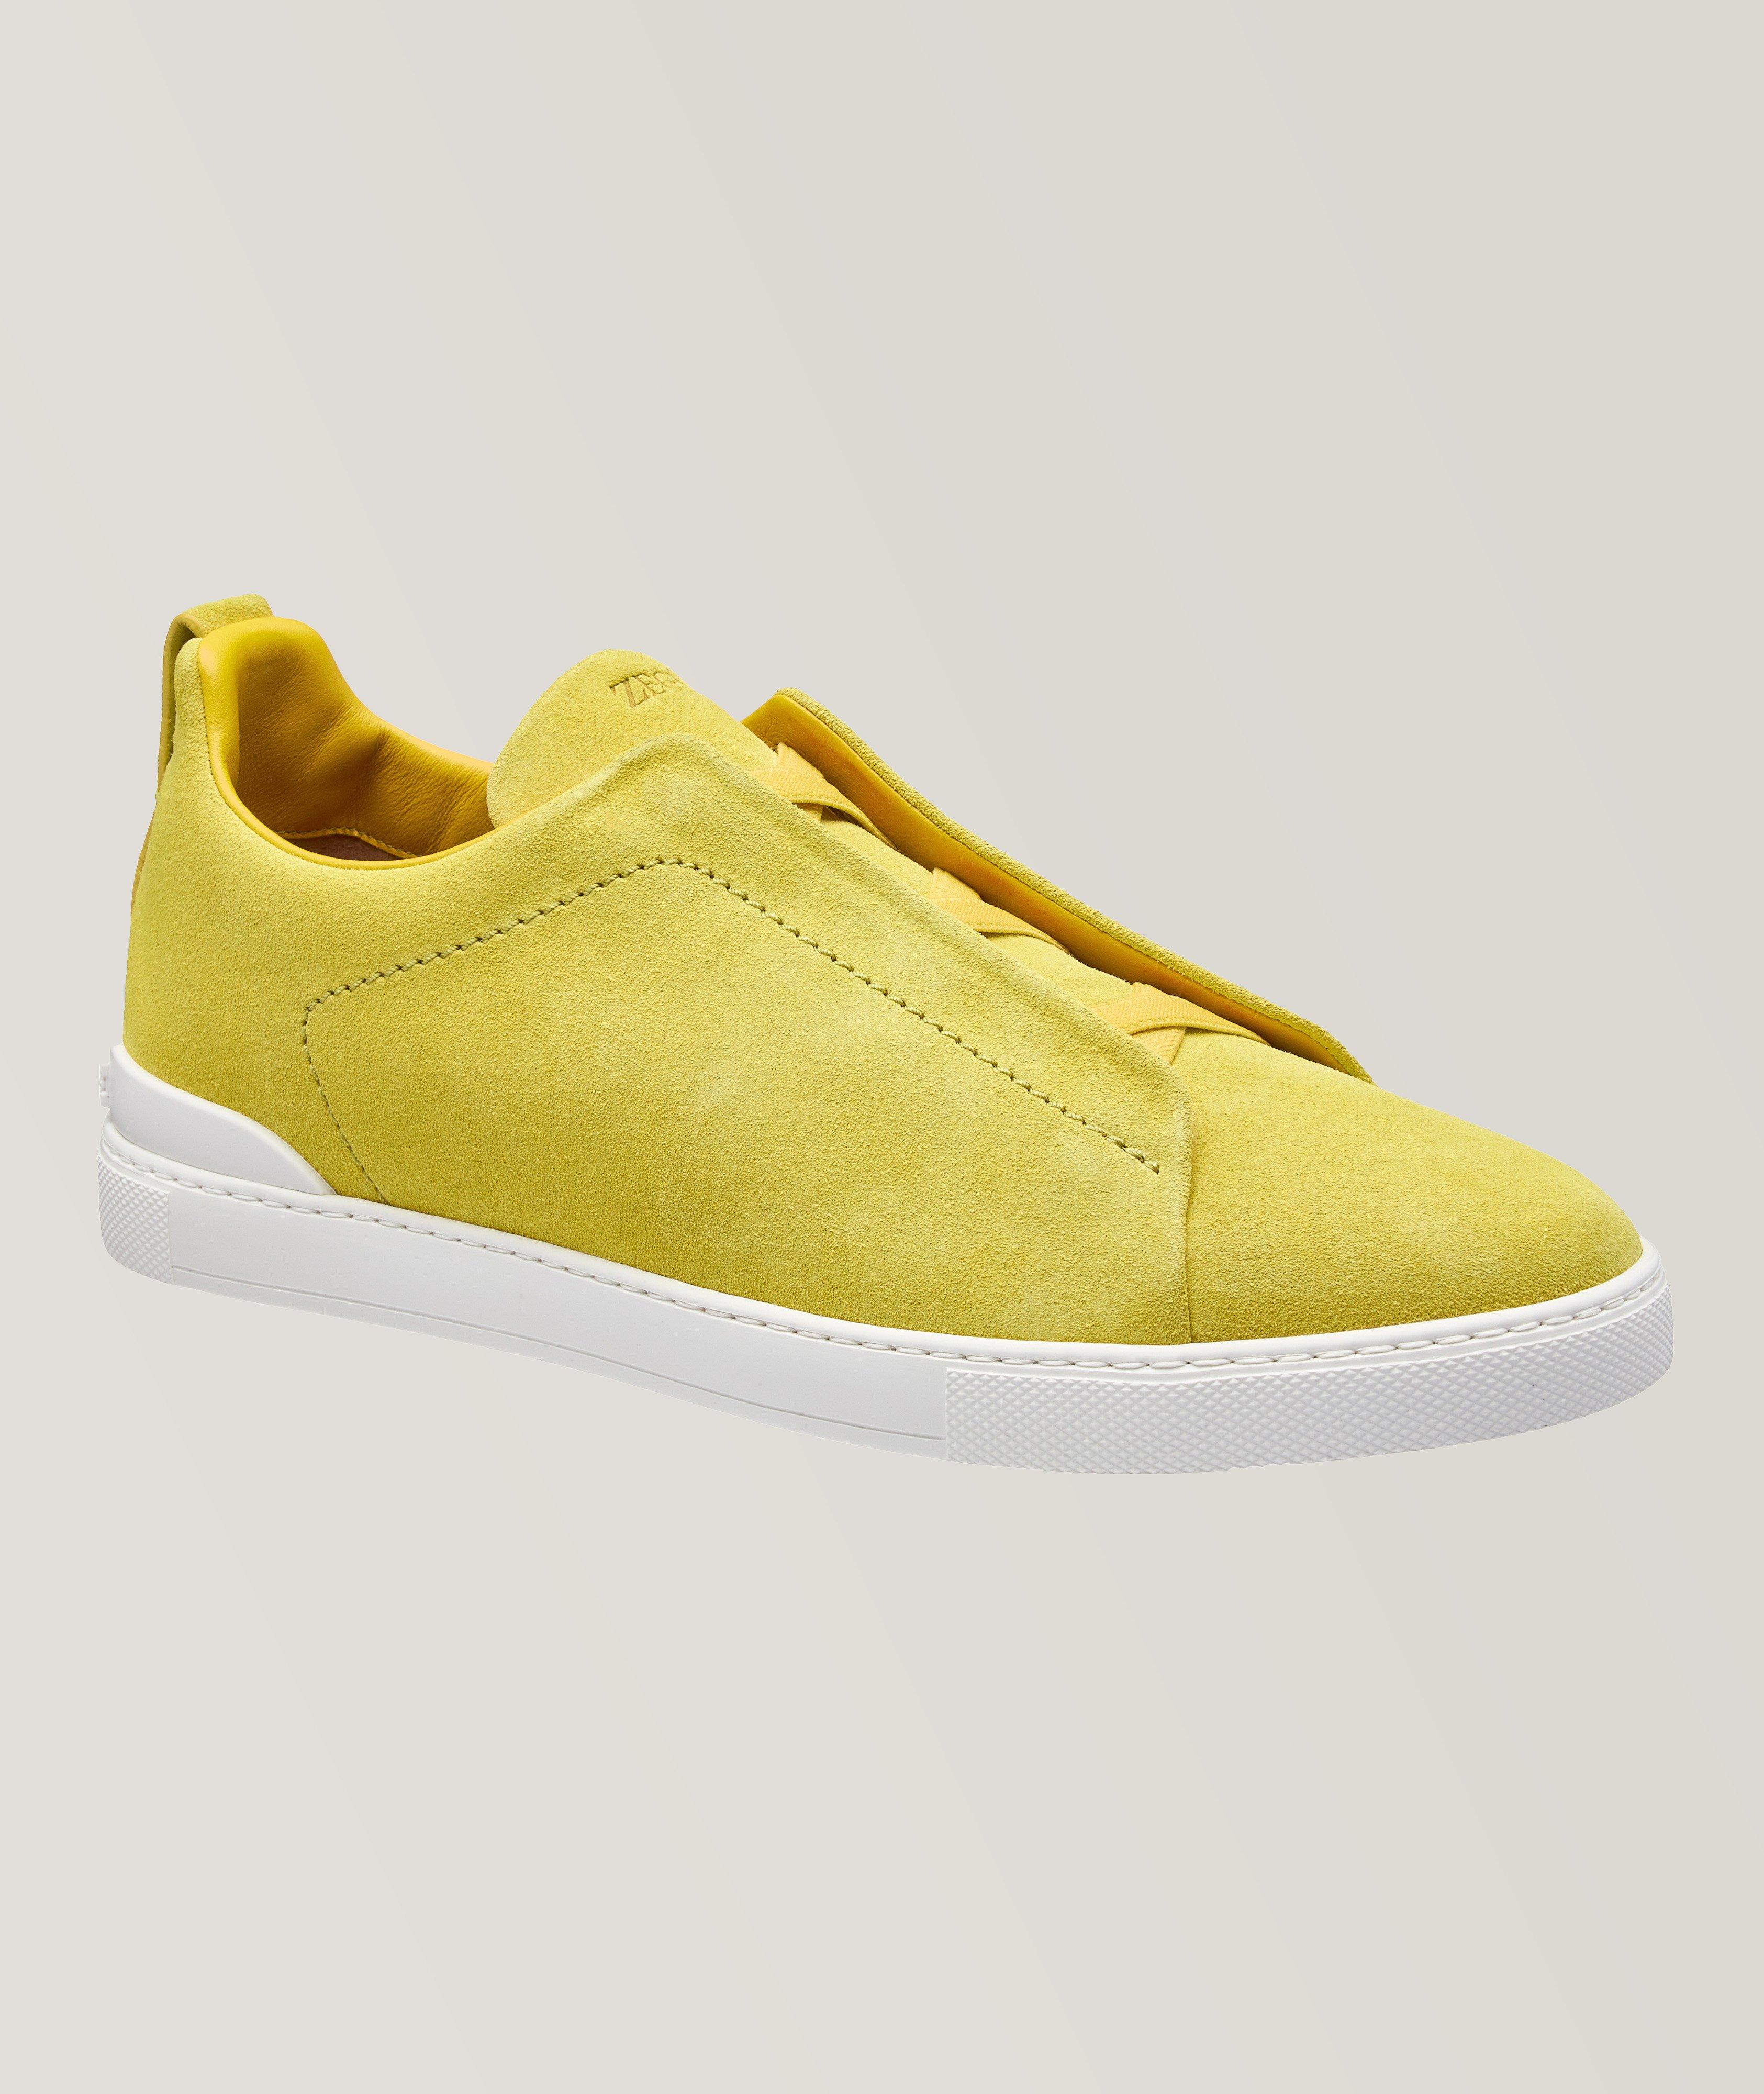 Triple Stitch Suede Slip-On Sneakers image 0